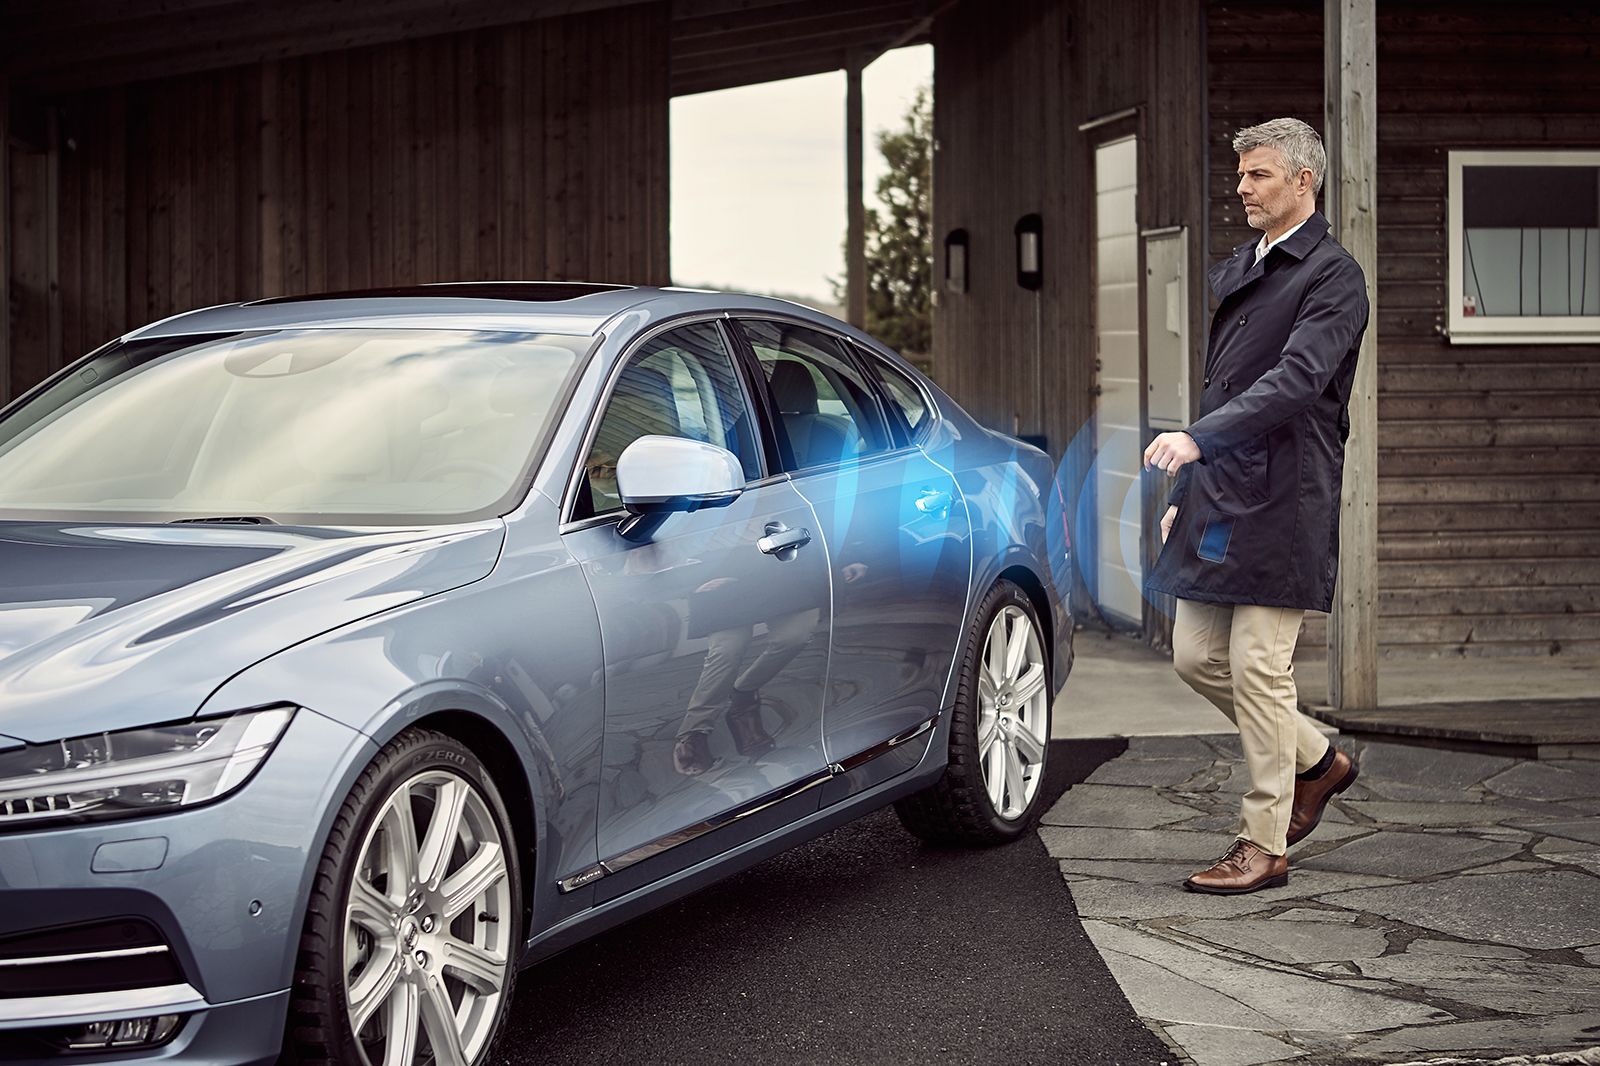 volvo says goodbye to car keys use your phone’s bluetooth to unlock instead image 1